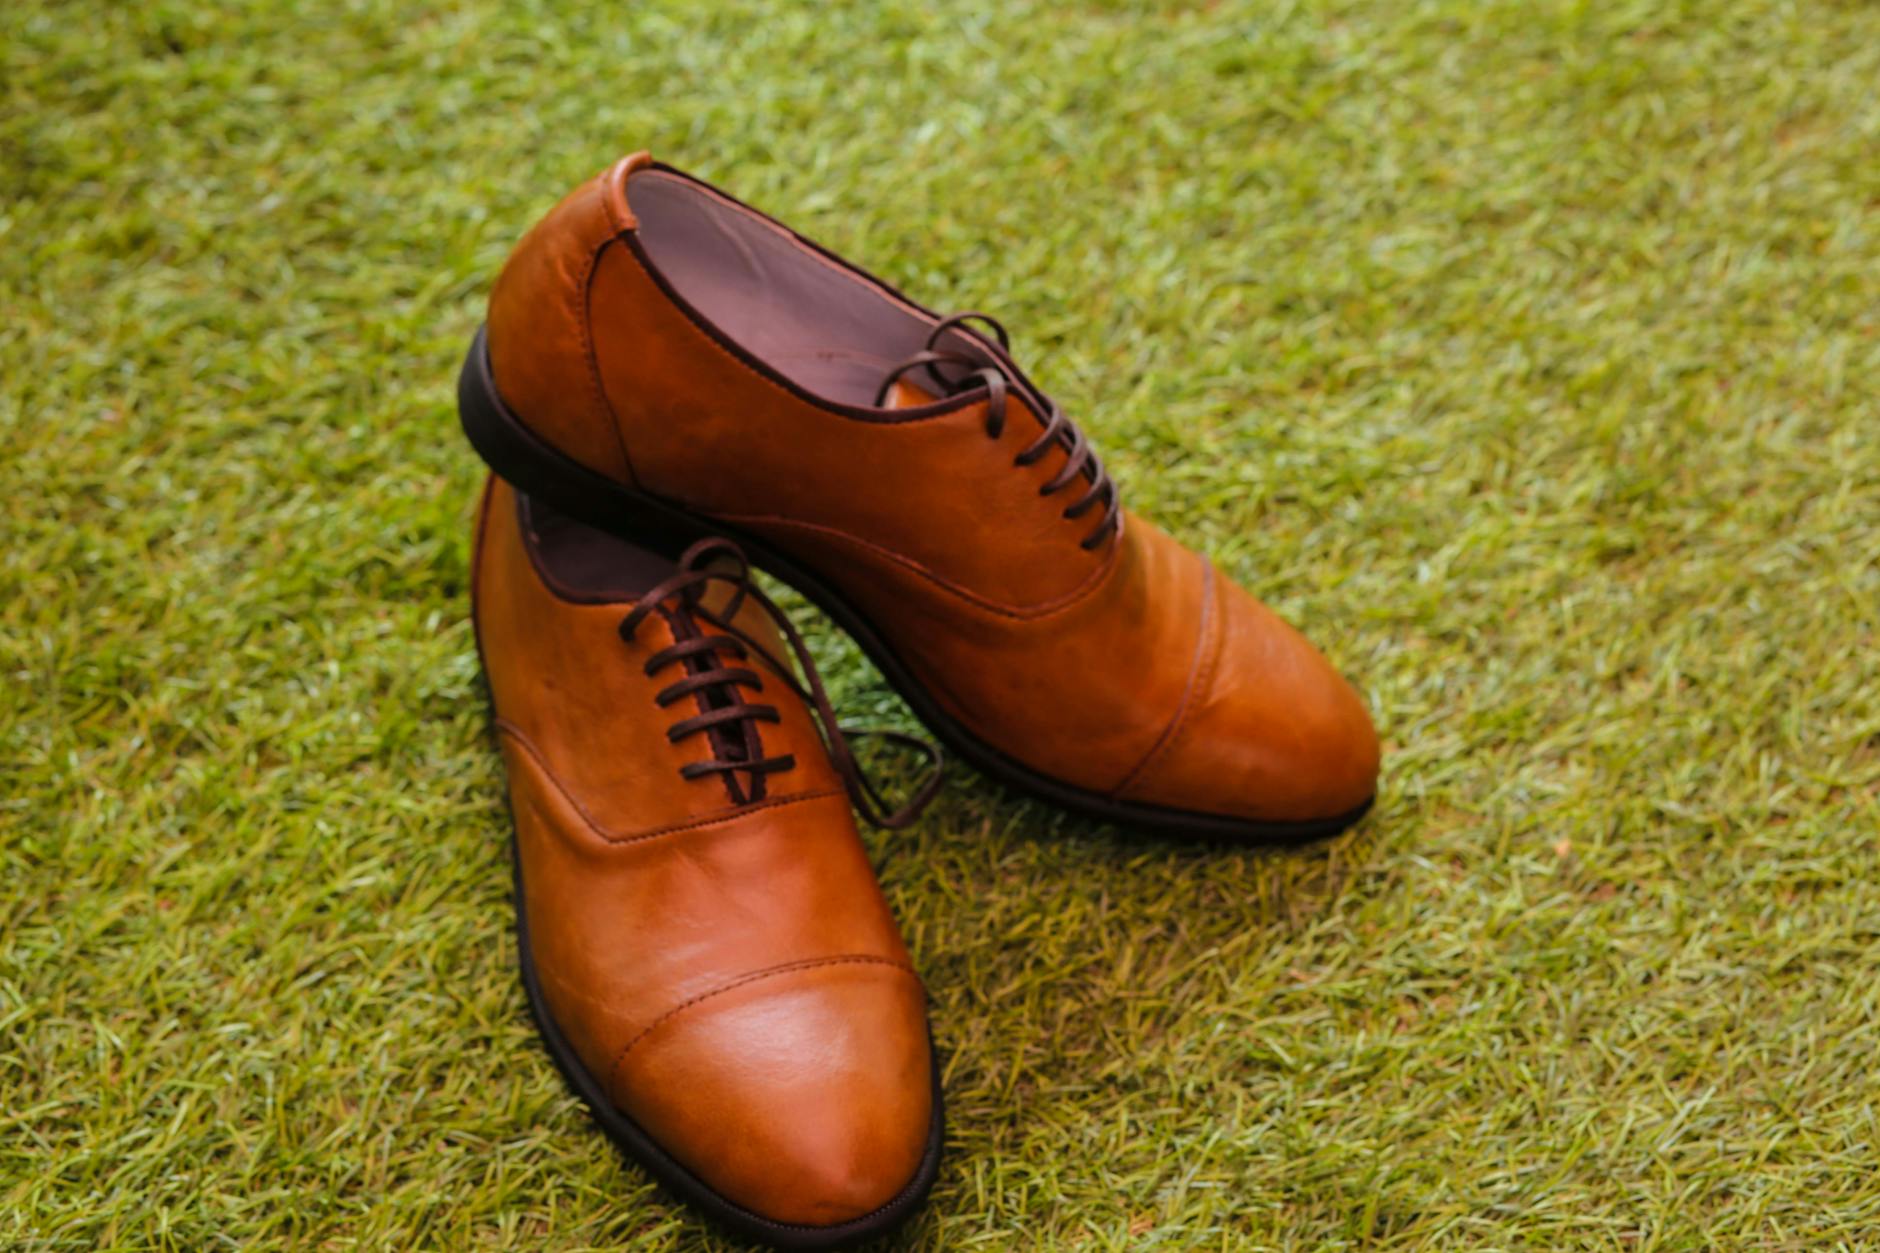 How to stretch leather shoes